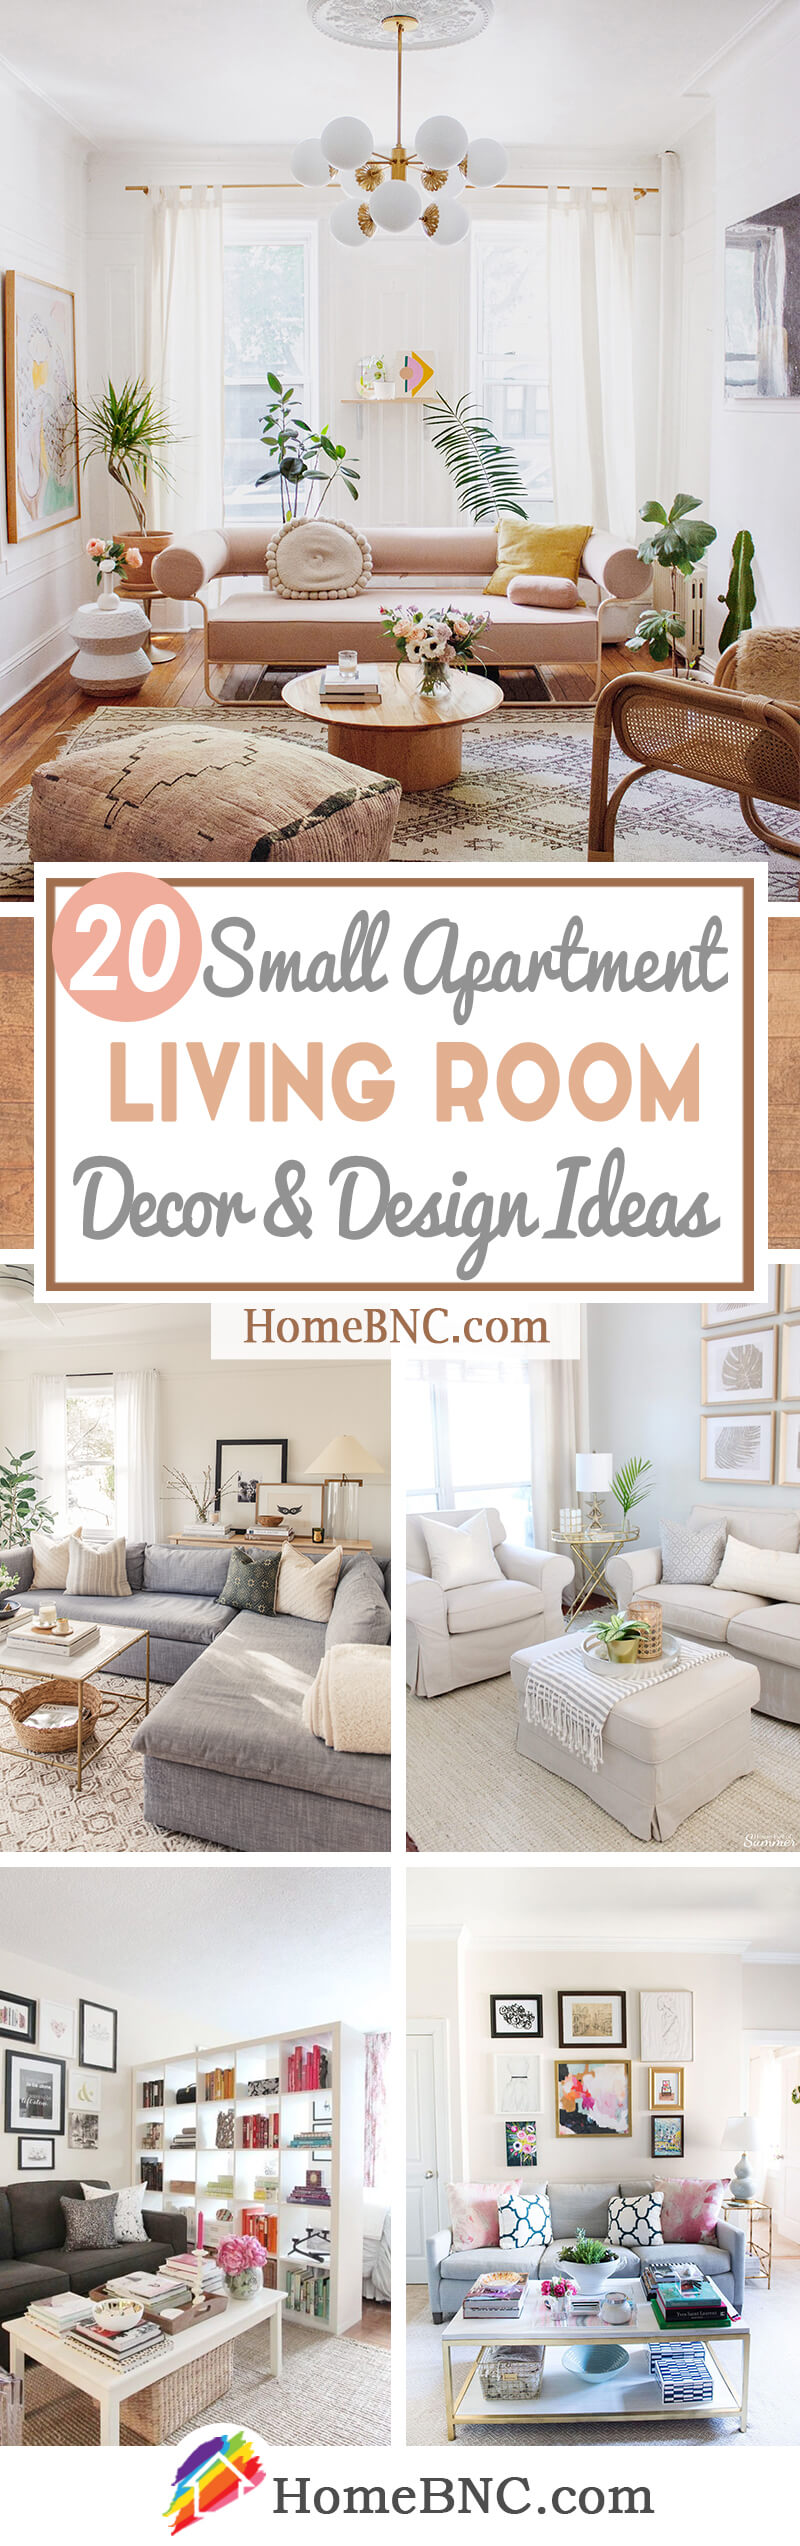 20 Best Small Apartment Living Room Decor and Design Ideas for 20